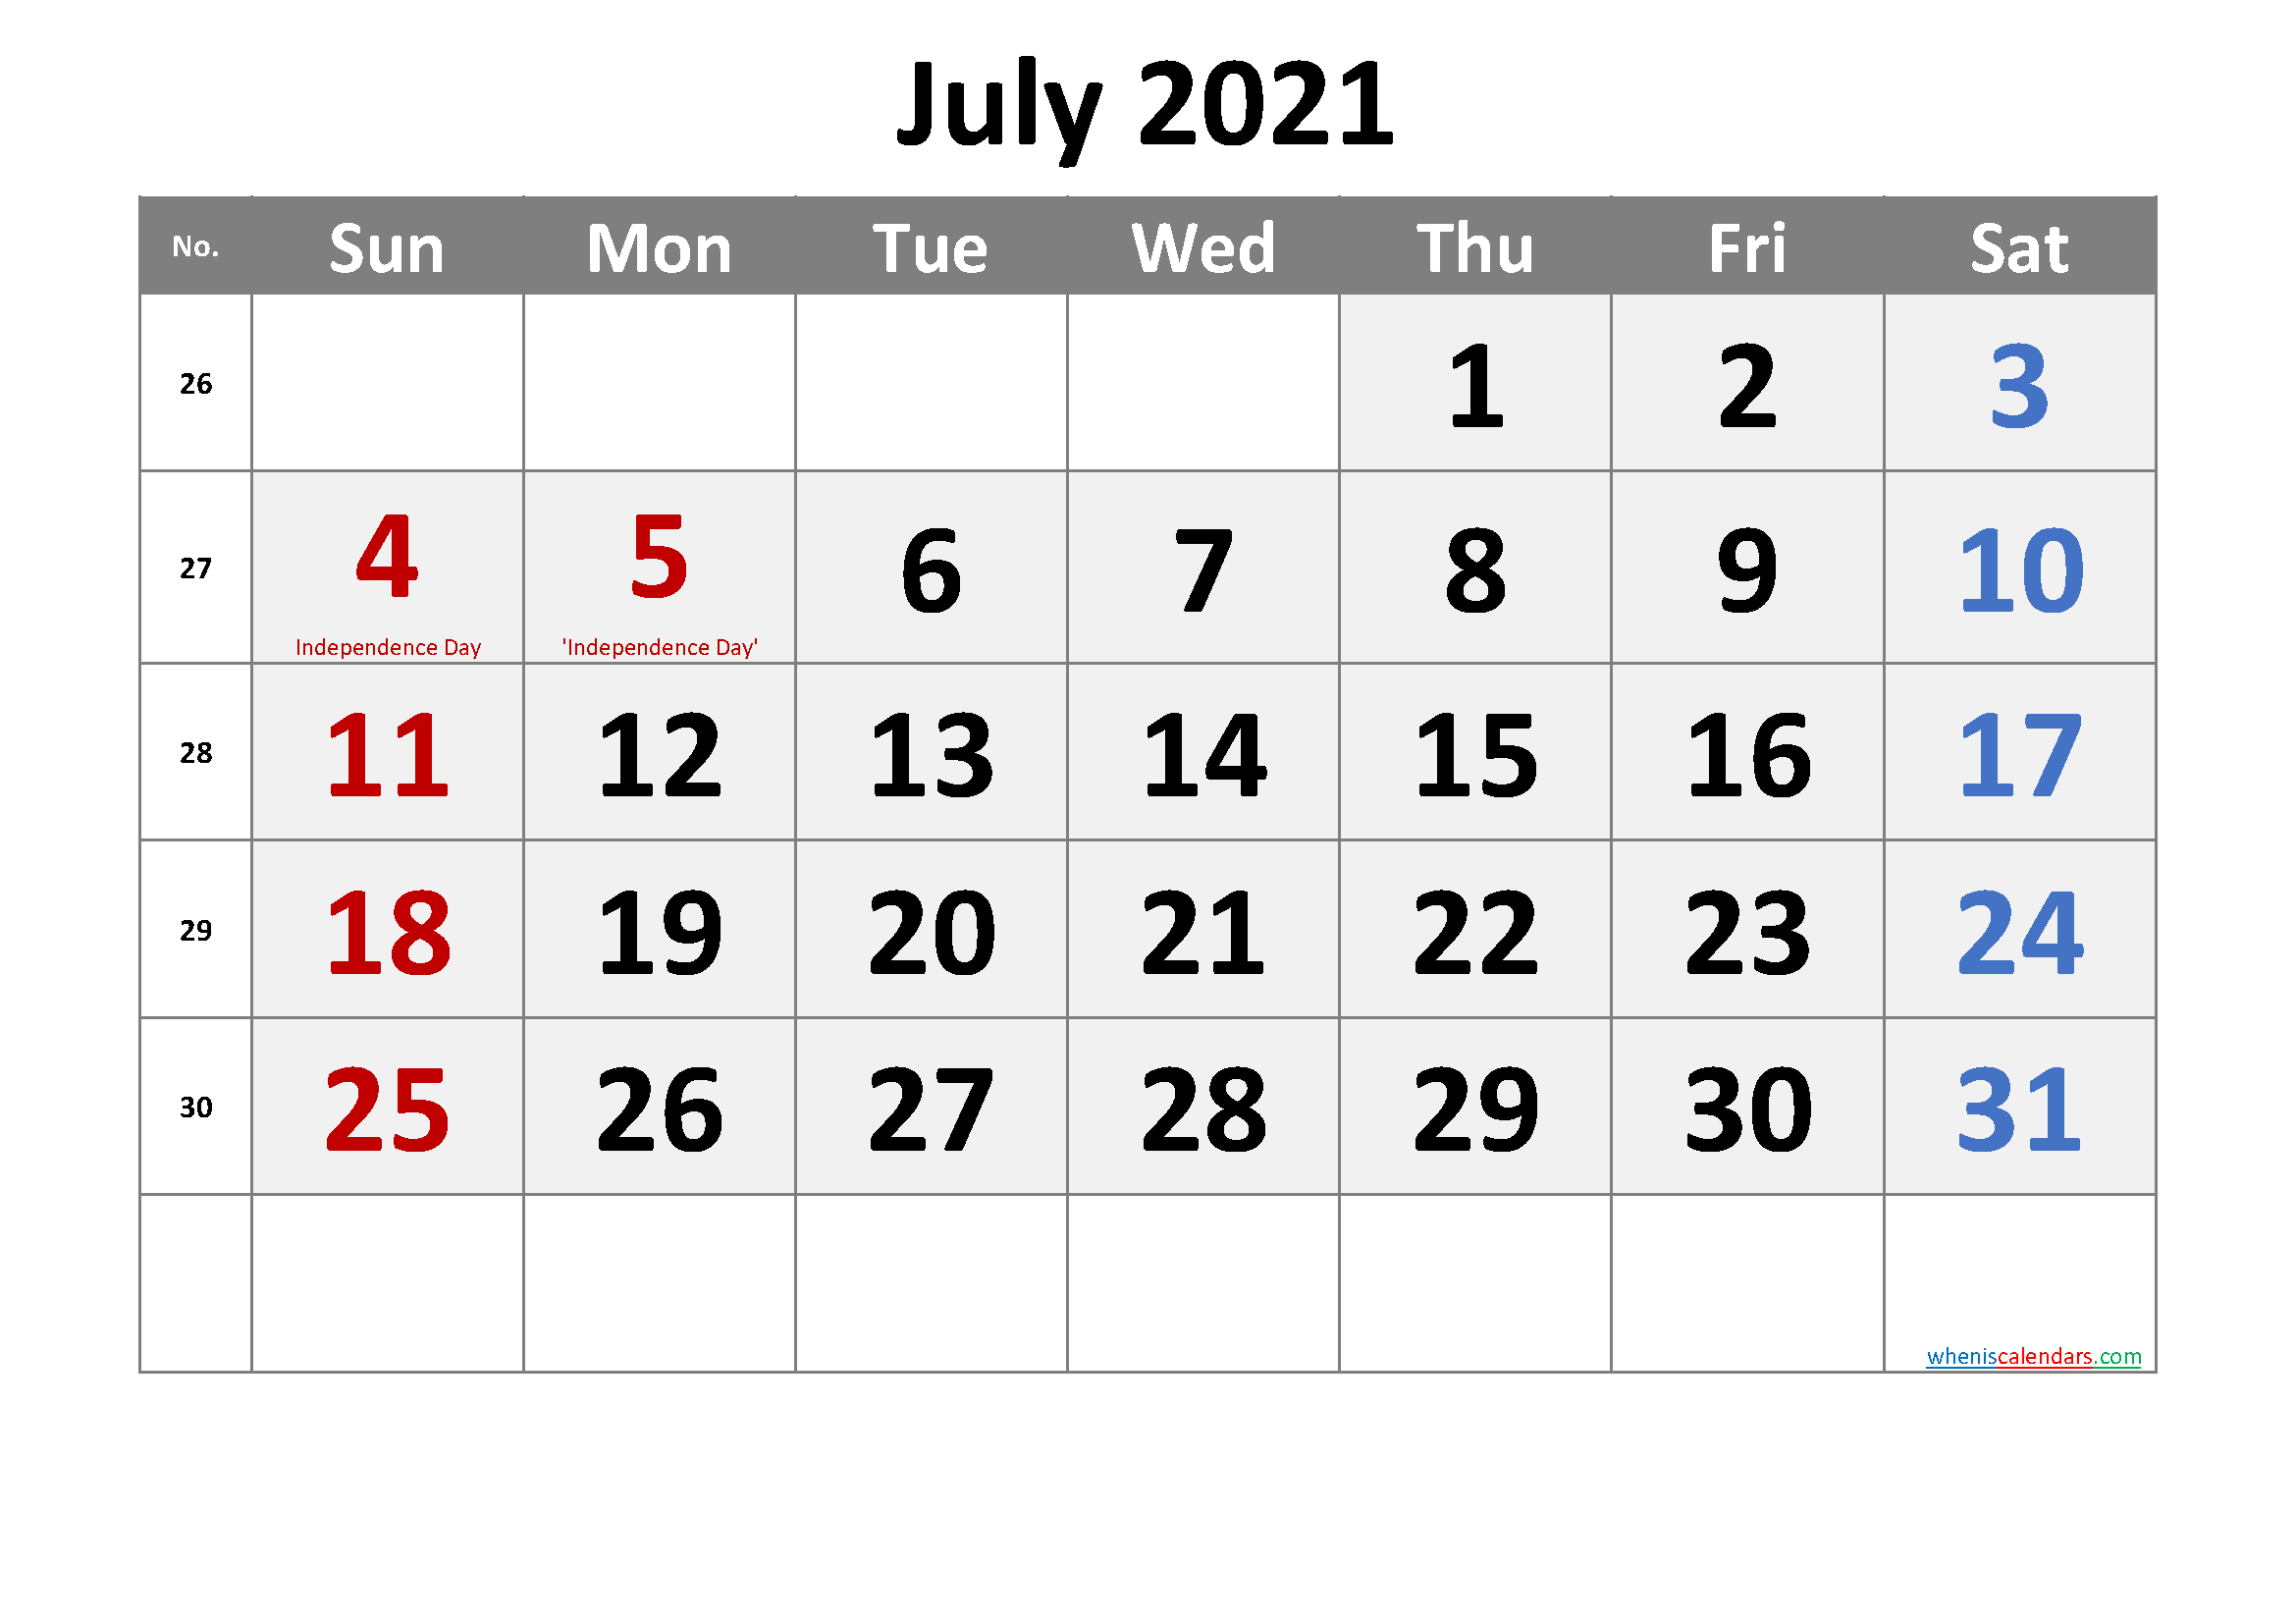 july 2021 calendar editable Editable July 2021 Calendar Word Template No Cr21m67 Free Printable 2020 Monthly Calendar With Holidays july 2021 calendar editable